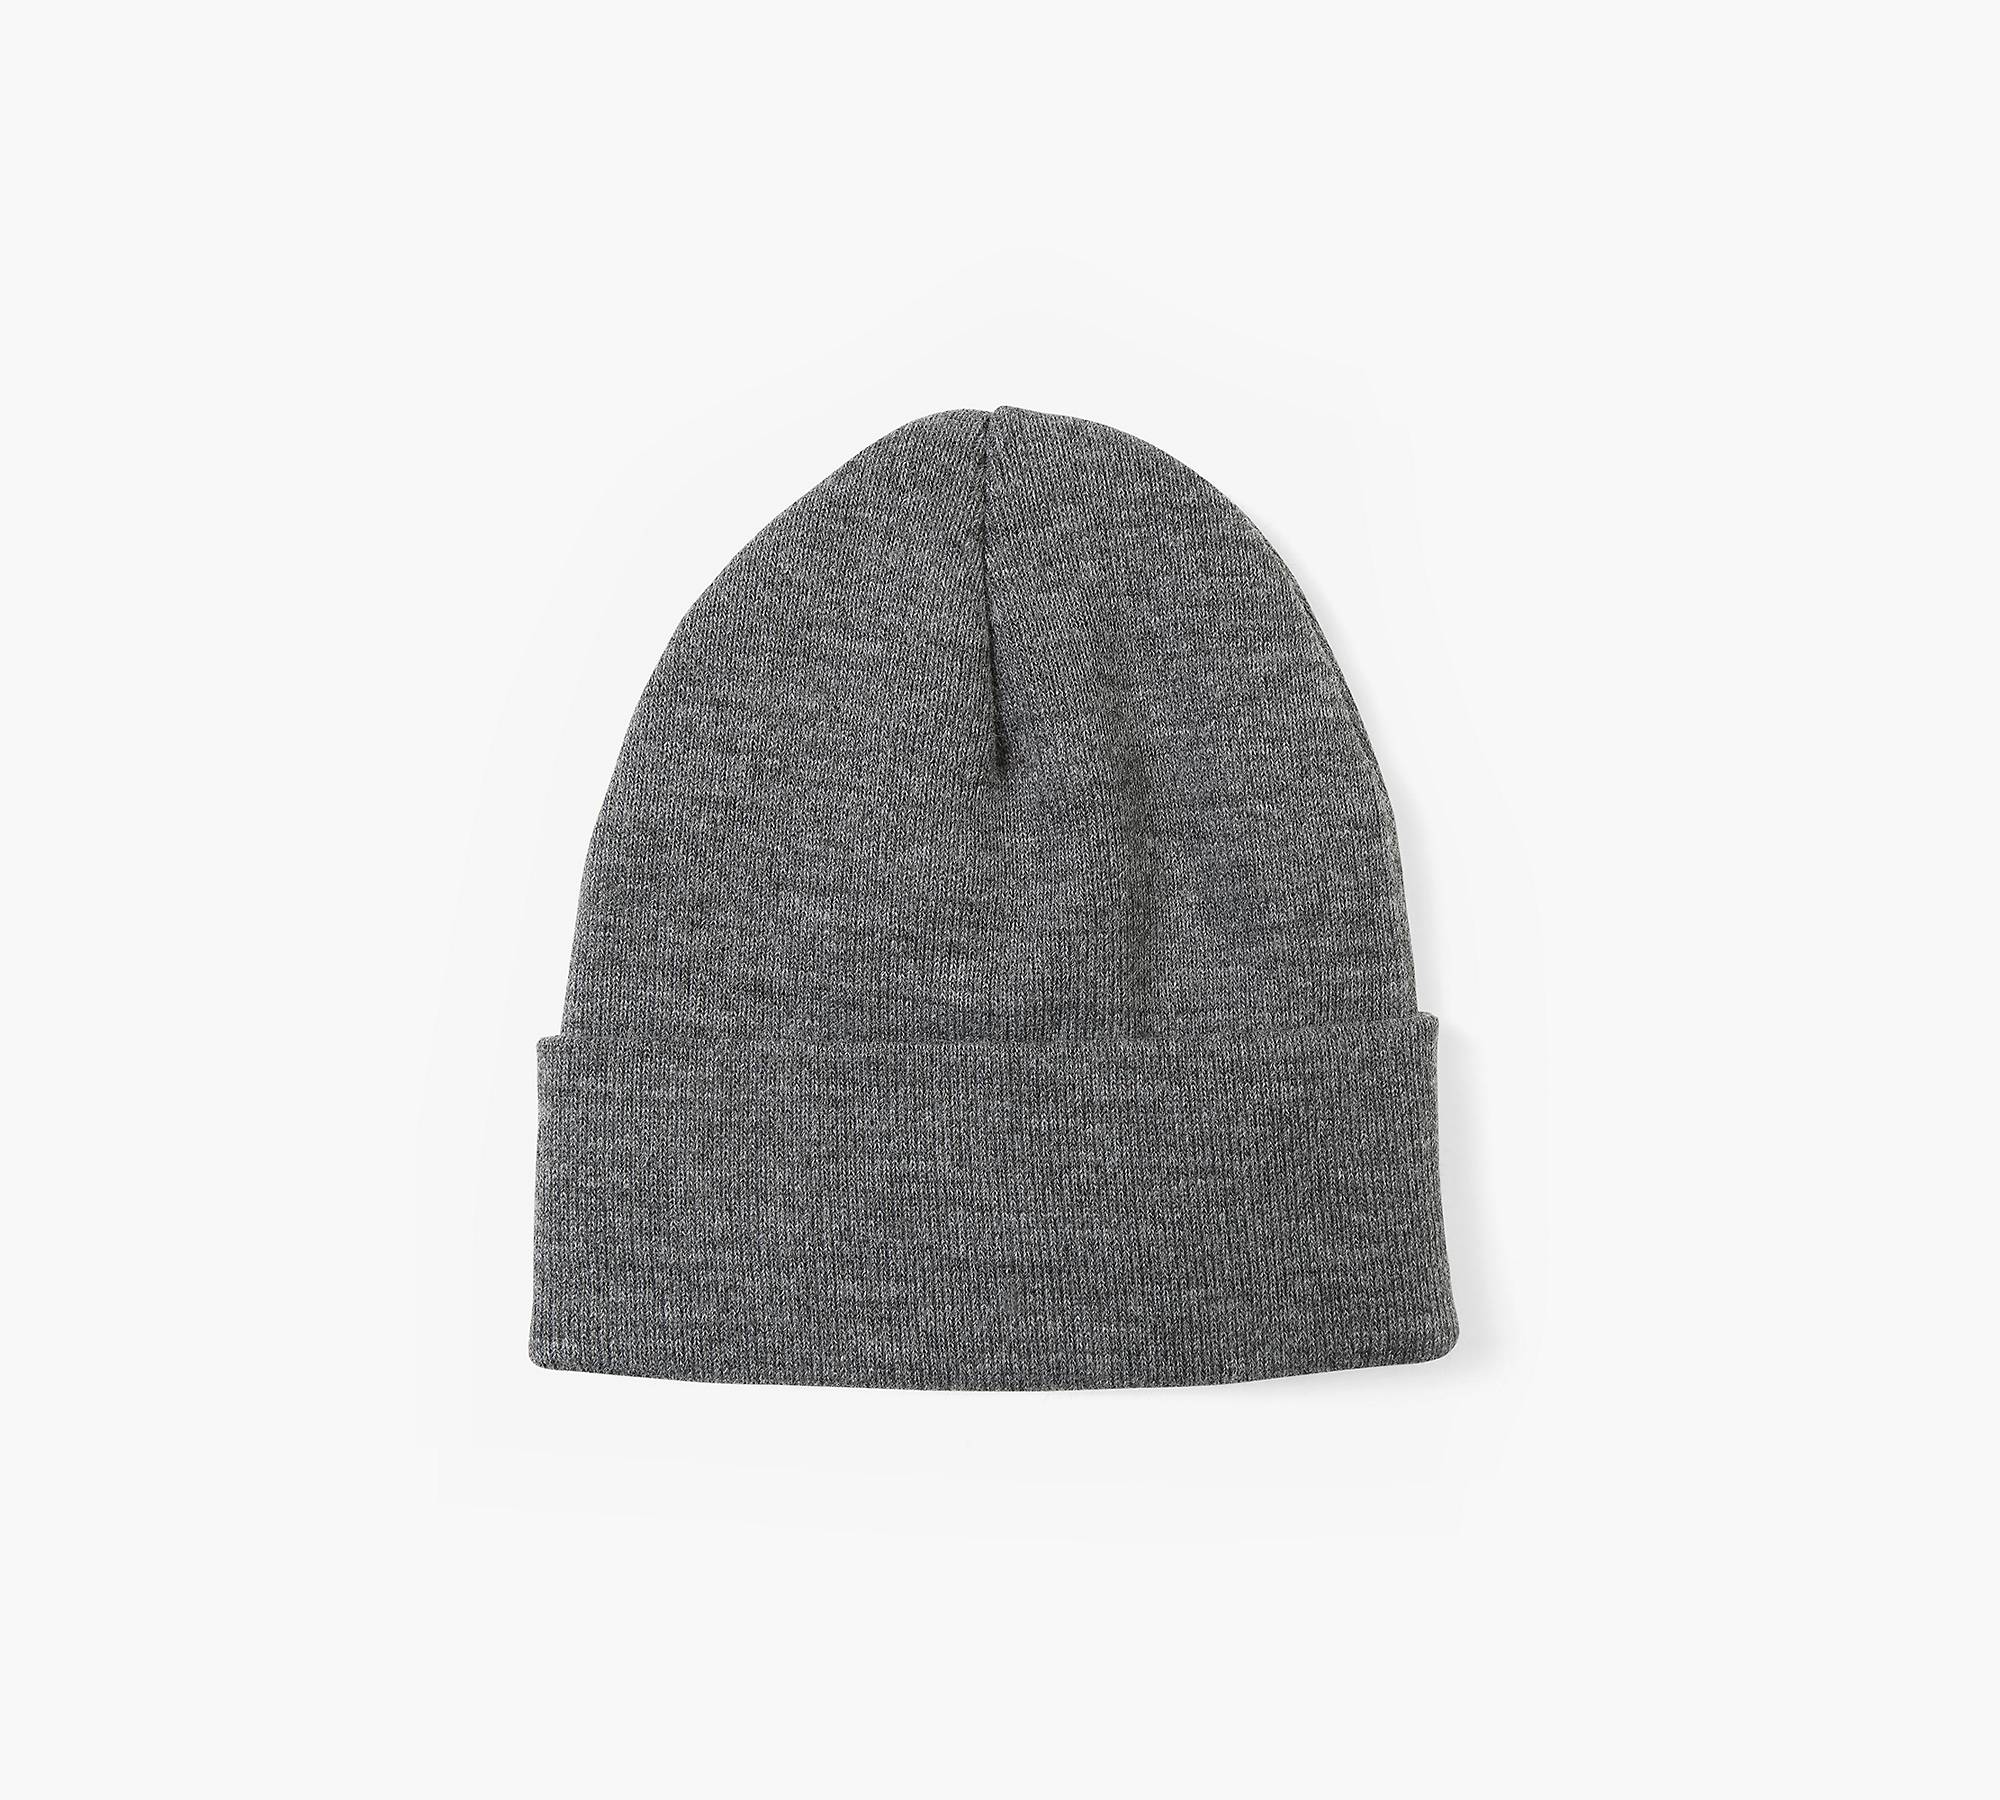 Embroidered Slouchy Beanie - Grey | Levi's® SI